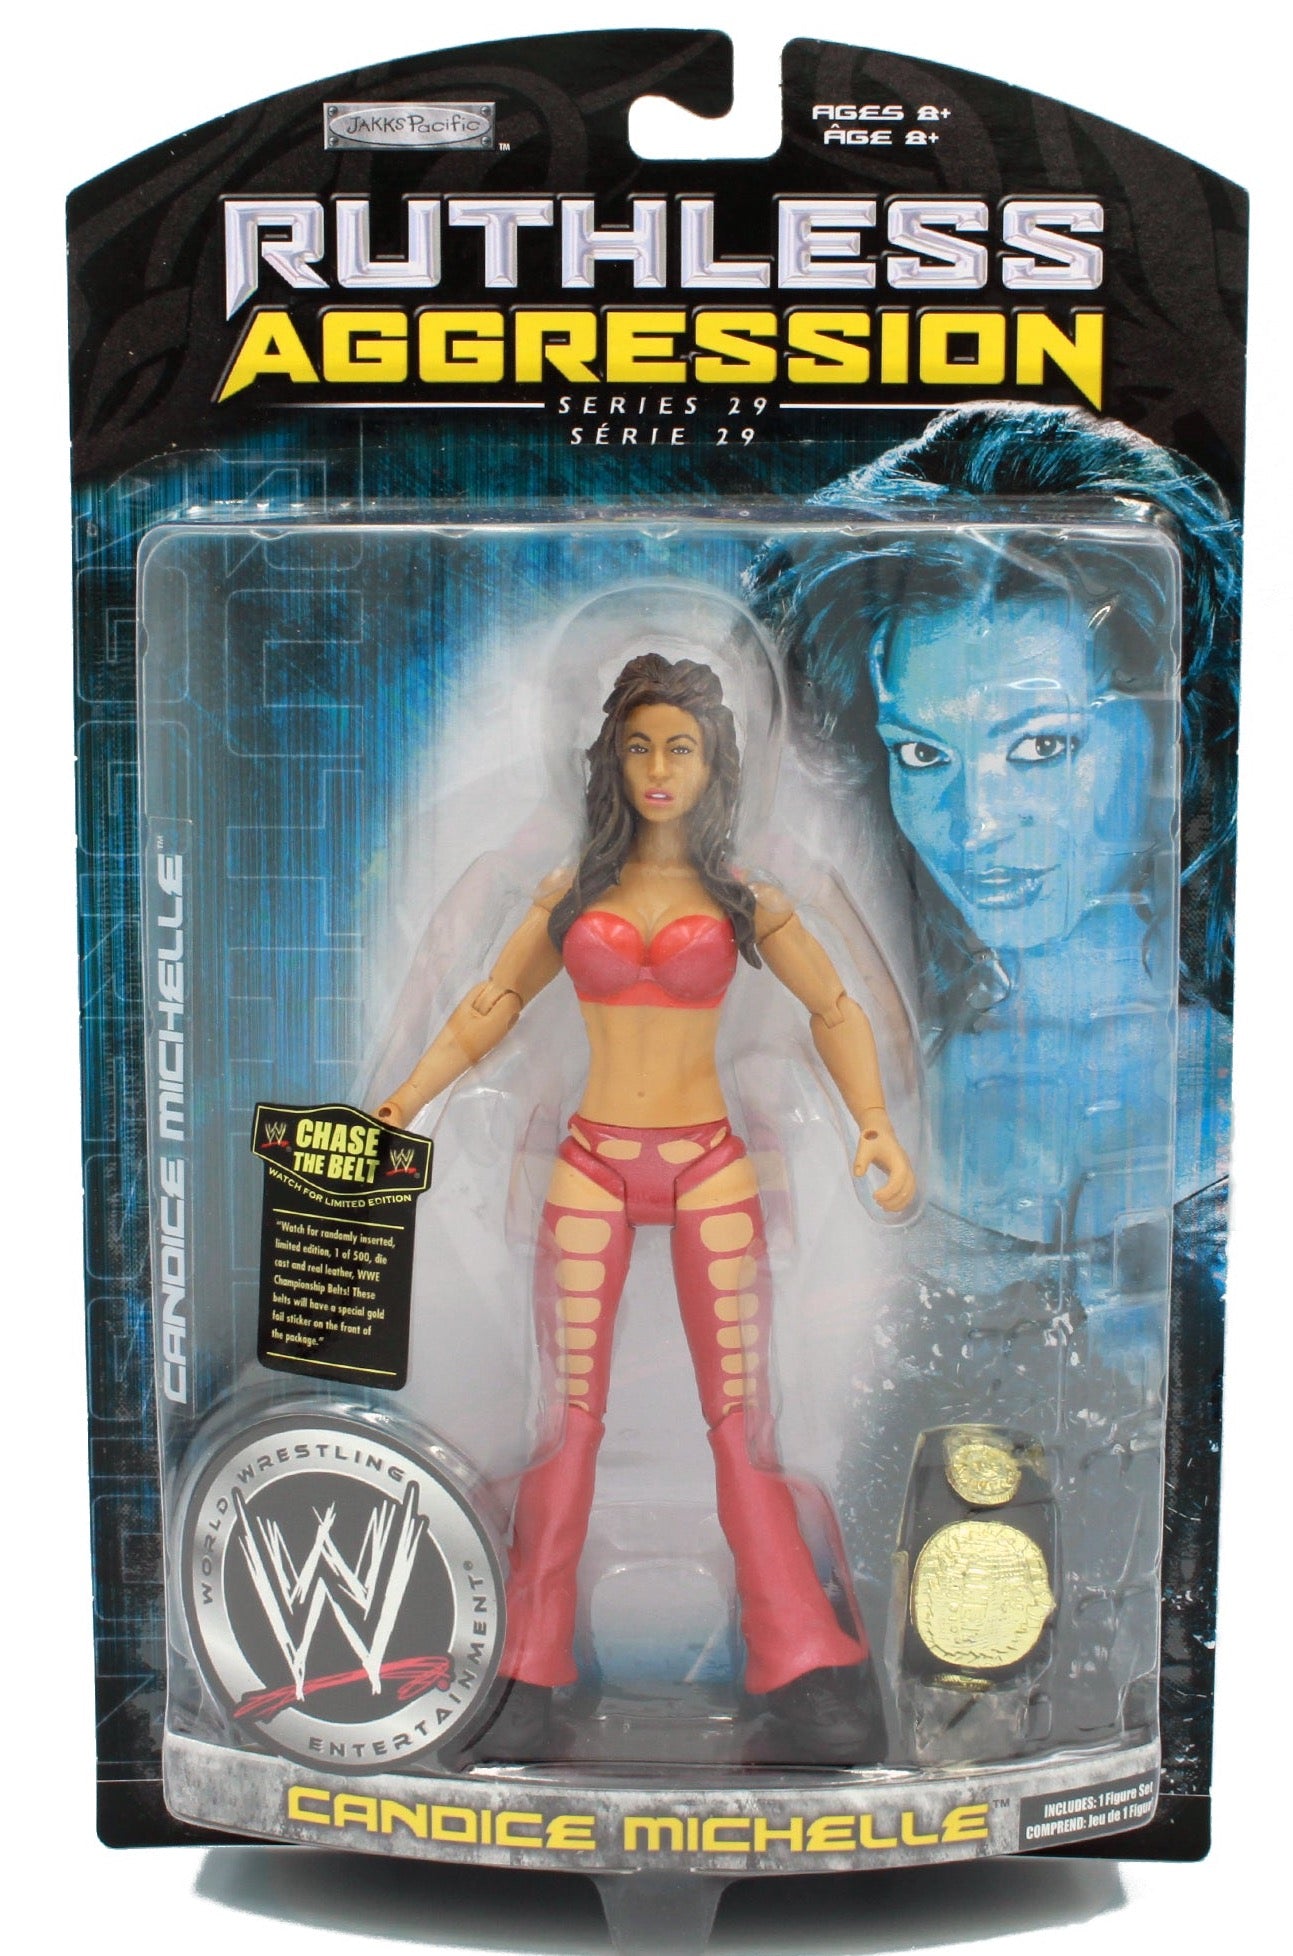 2007 WWE Jakks Pacific Ruthless Aggression Series 29 Candice Michelle